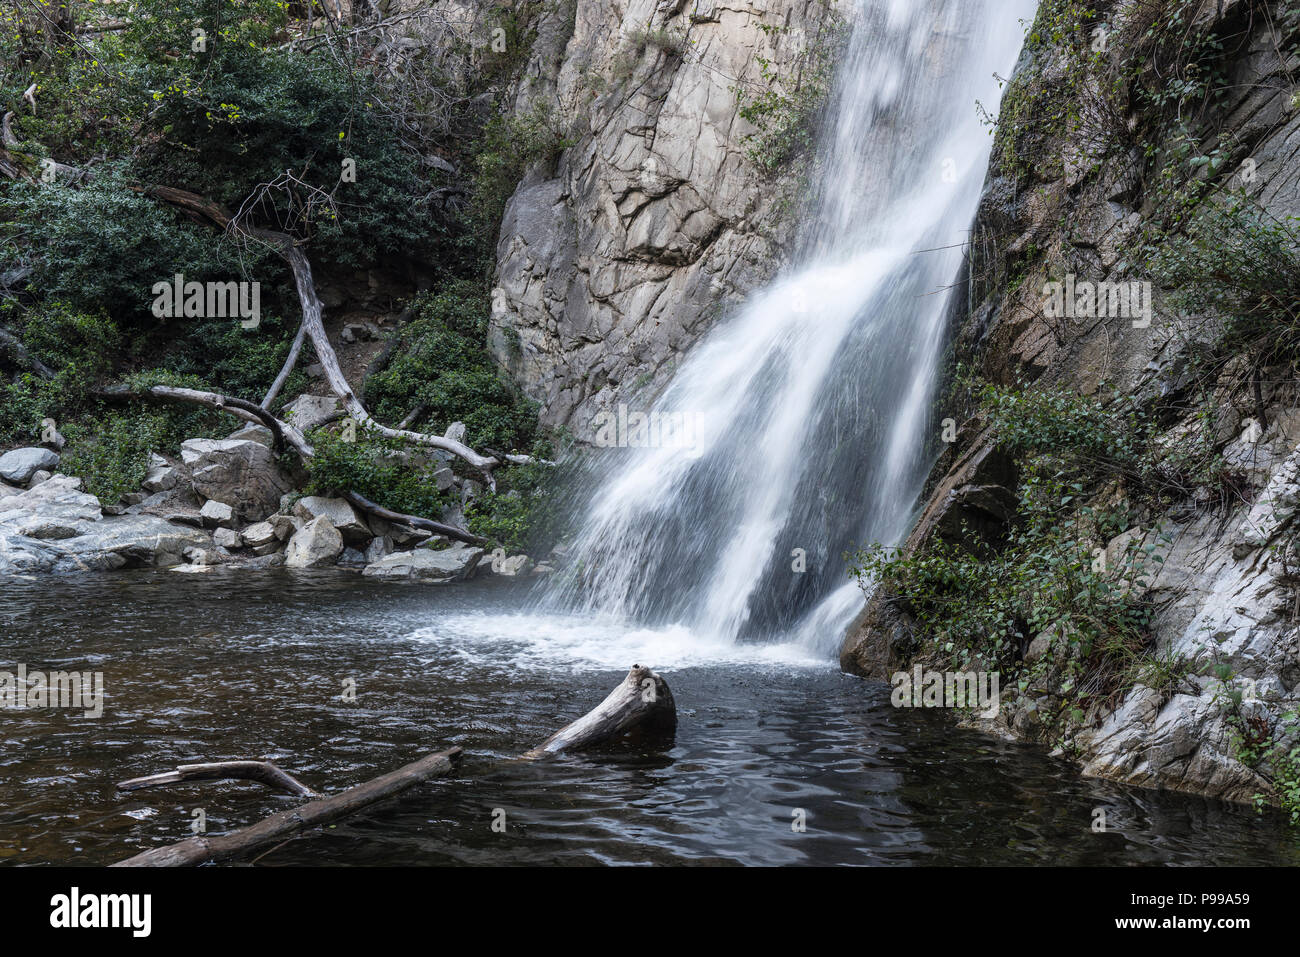 Sturtevant Falls in the Angeles National Forest and San Gabriel Mountains near Pasadena and Los Angeles, California. Stock Photo